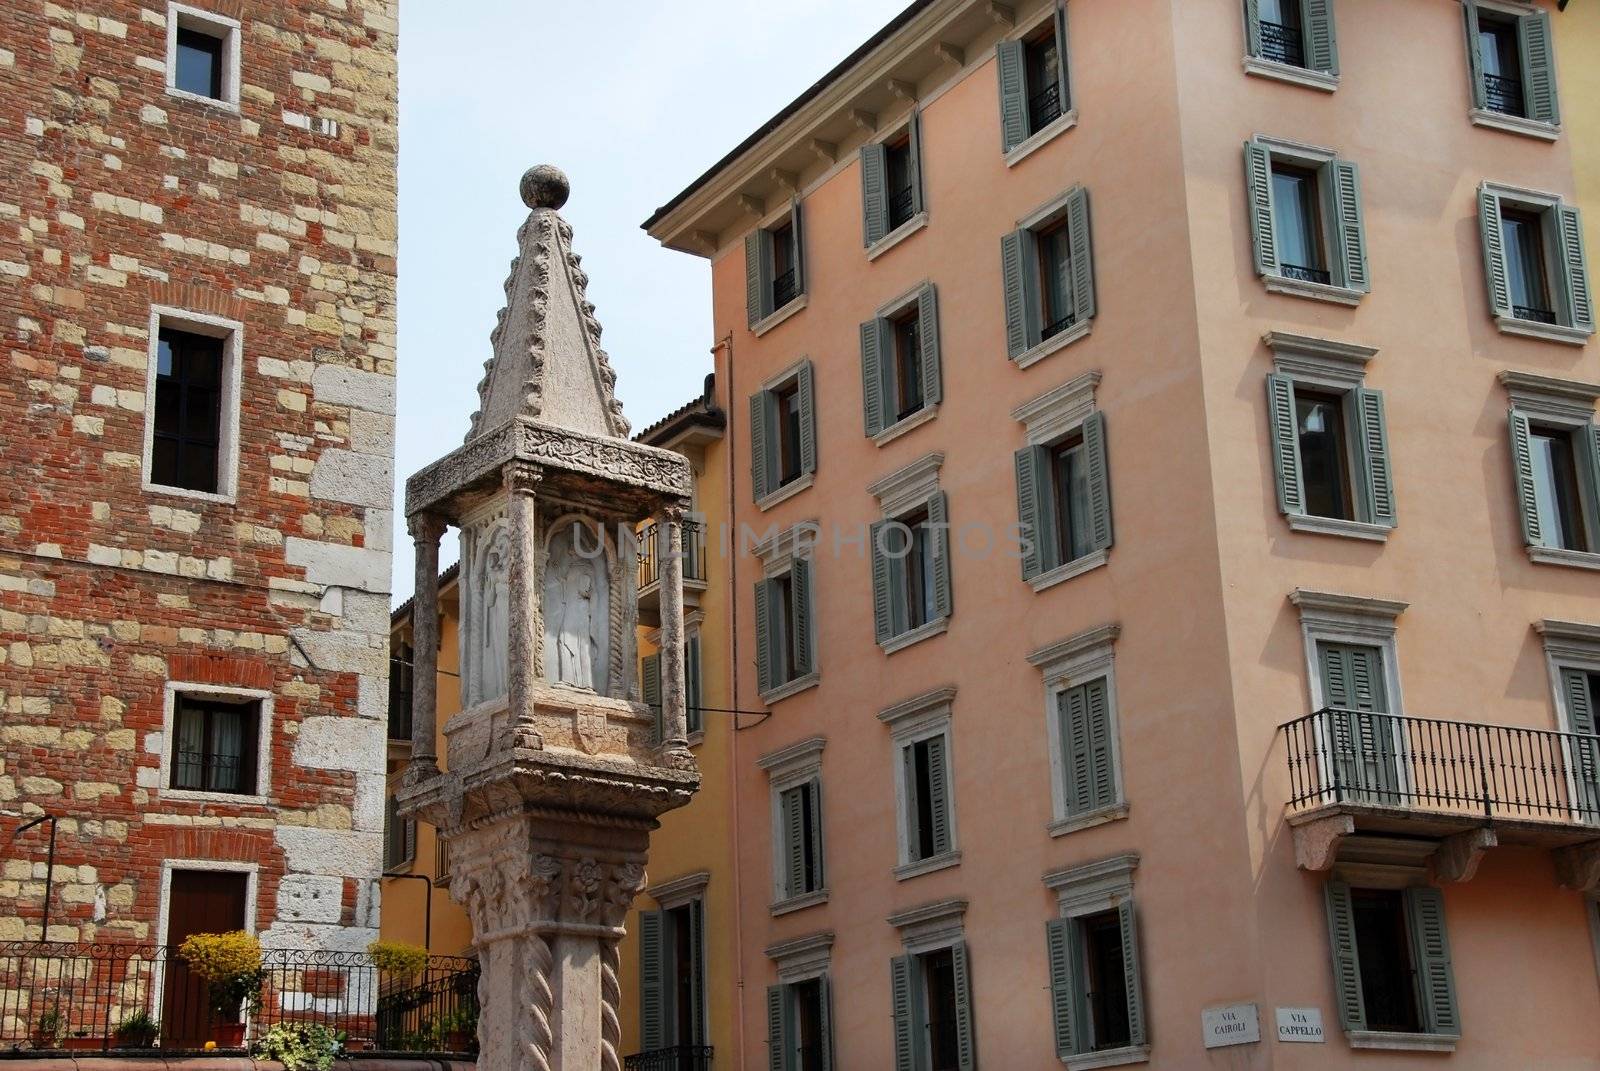 building exterior details and saint statue in Verona, Italy